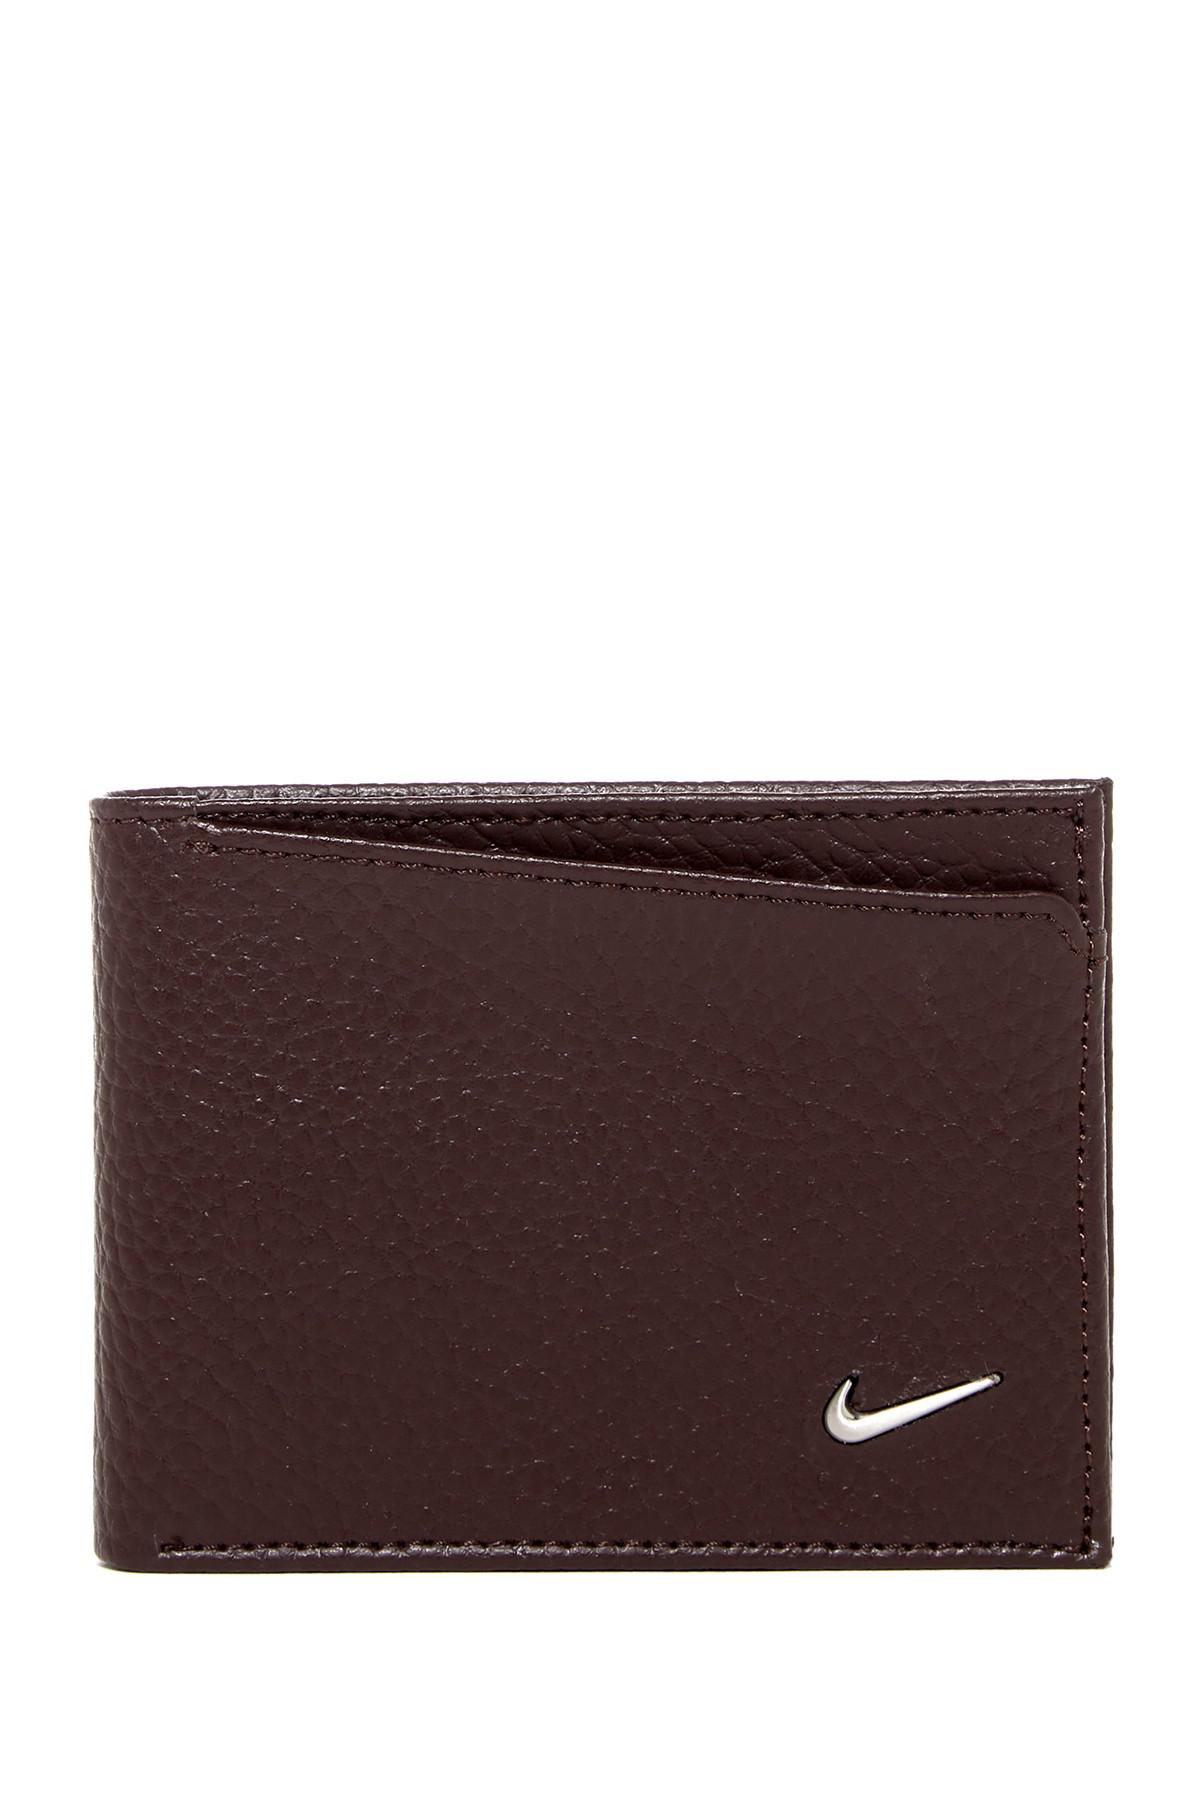 Nike Leather Passcase Wallet in Brown for Men | Lyst